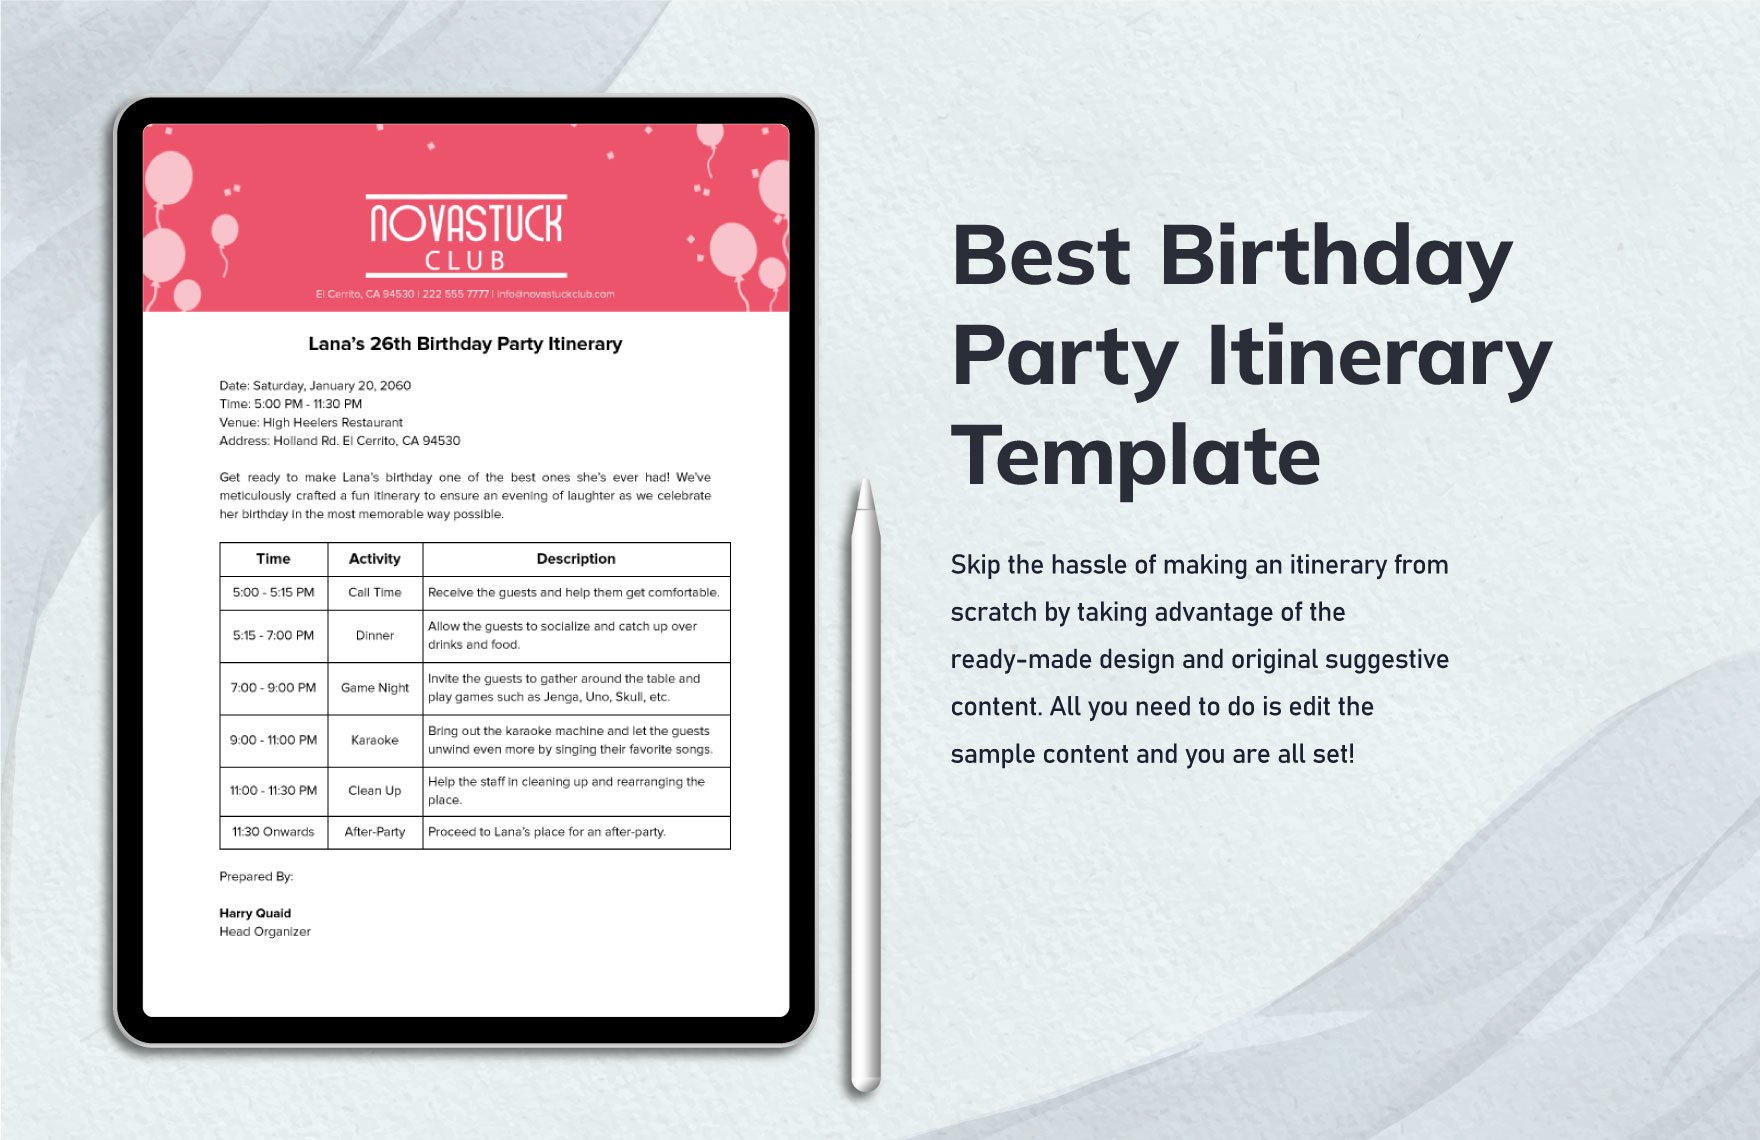 Best Birthday Party Itinerary Template